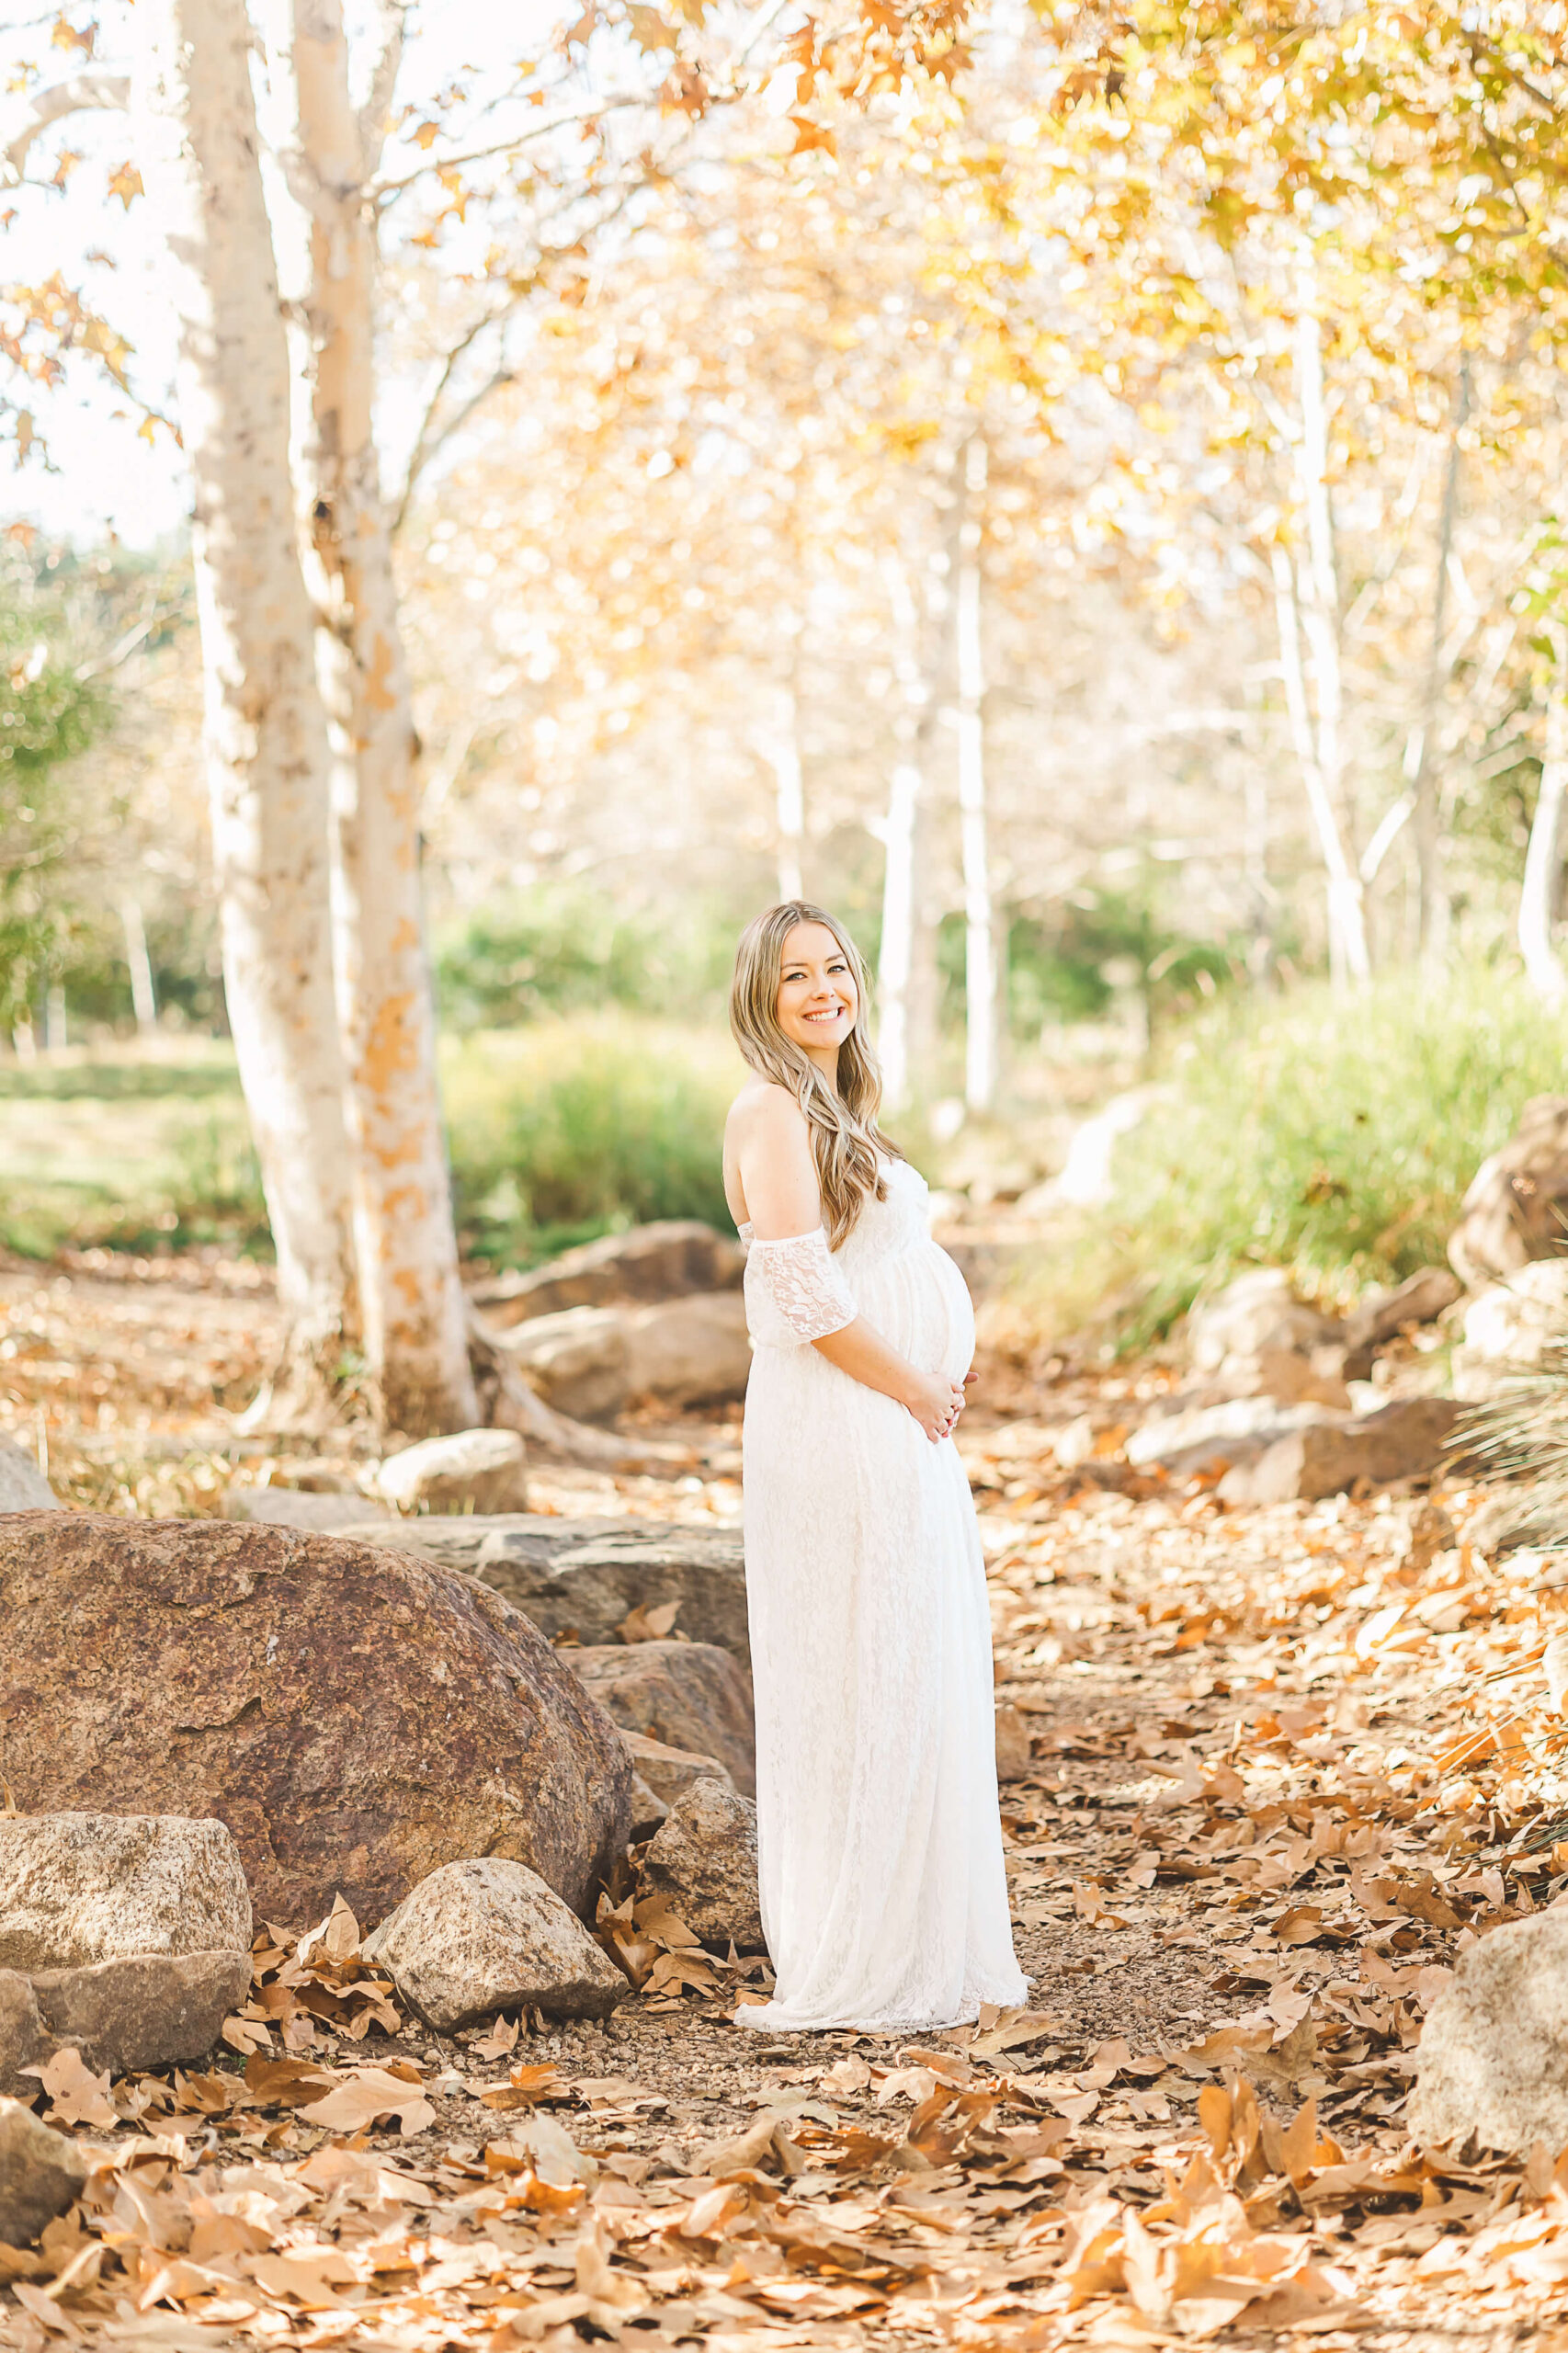 Mama posing holding her baby bump on a nature trail wearing a white lace dress.